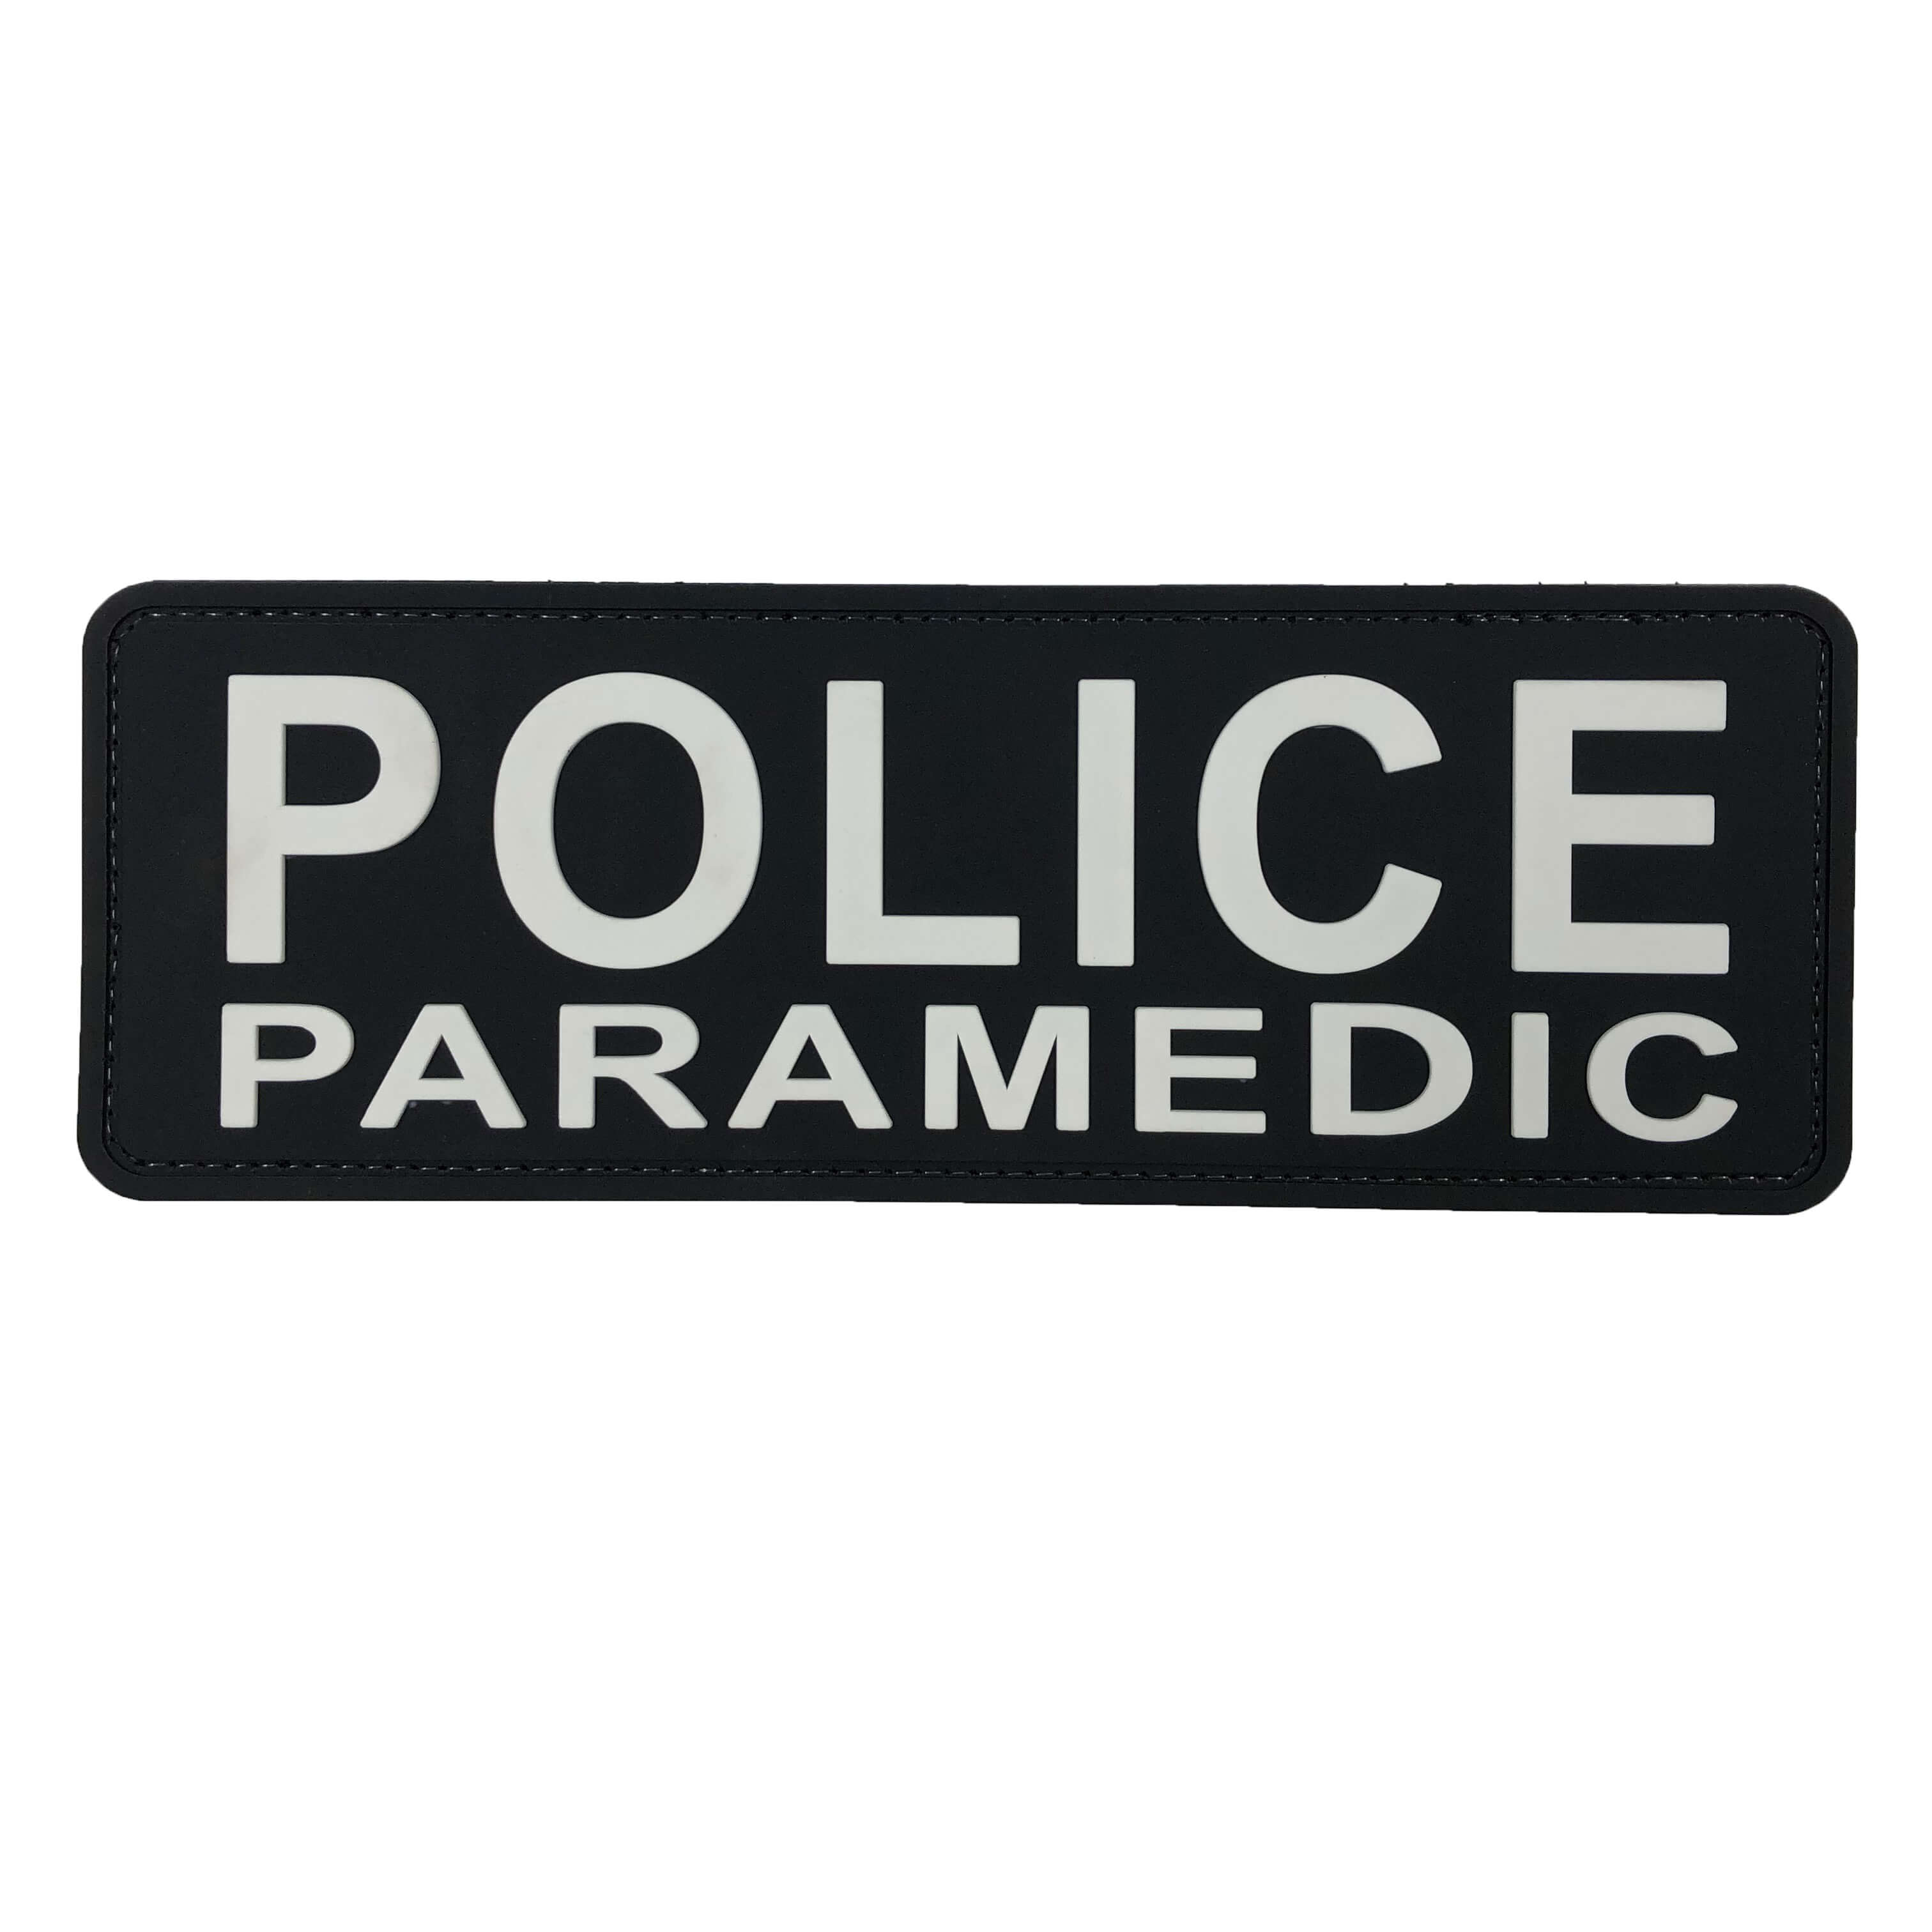 MORTHOME M Paramedic Medic Medical Tactical Morale Badge Patch - PVC Rubber  - 3.1 Round